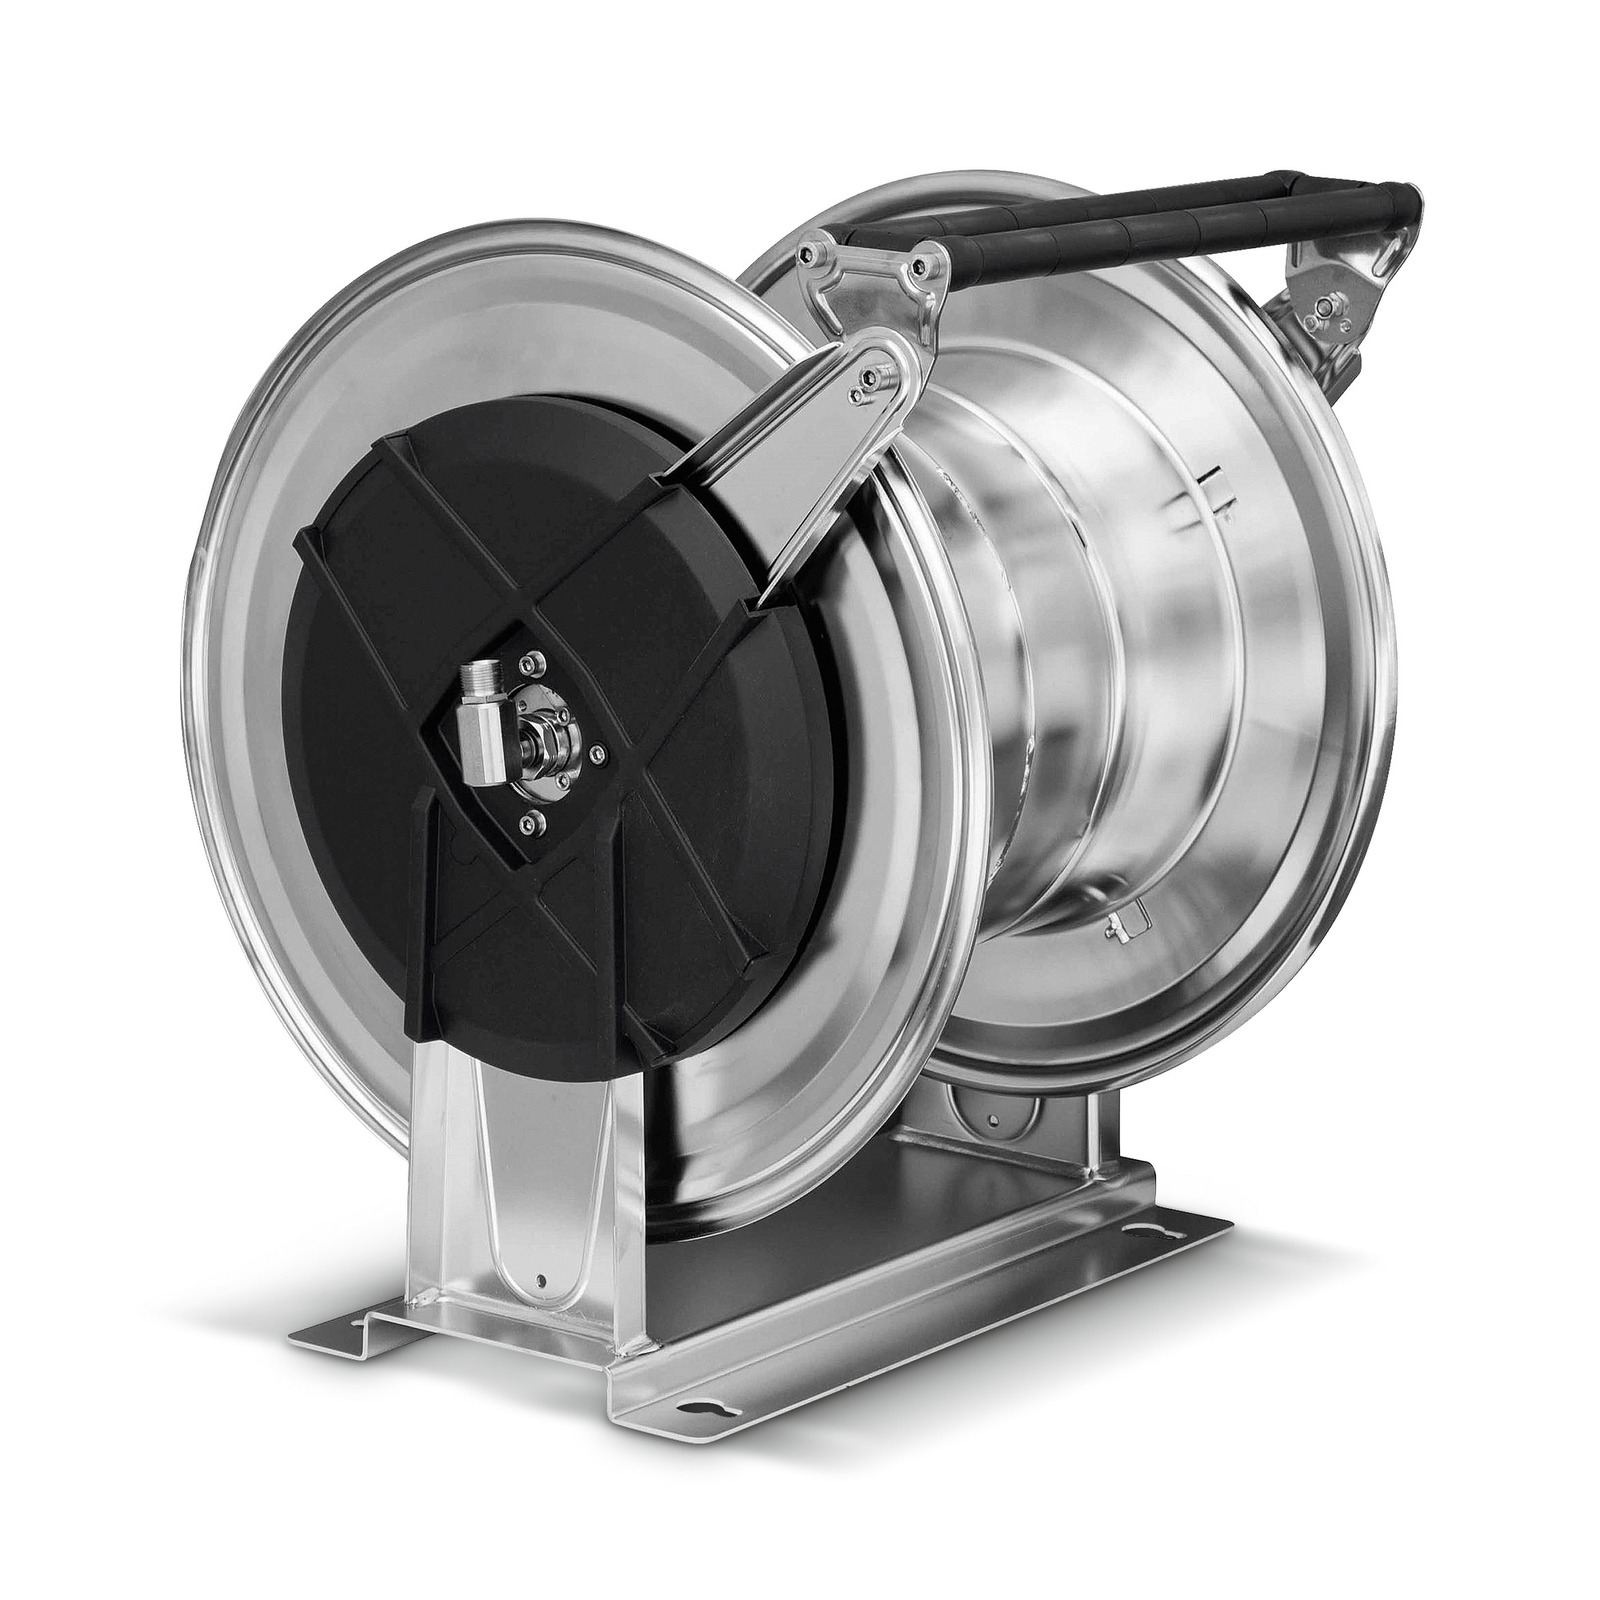 Automatic stainless steel hose reel, 40 m